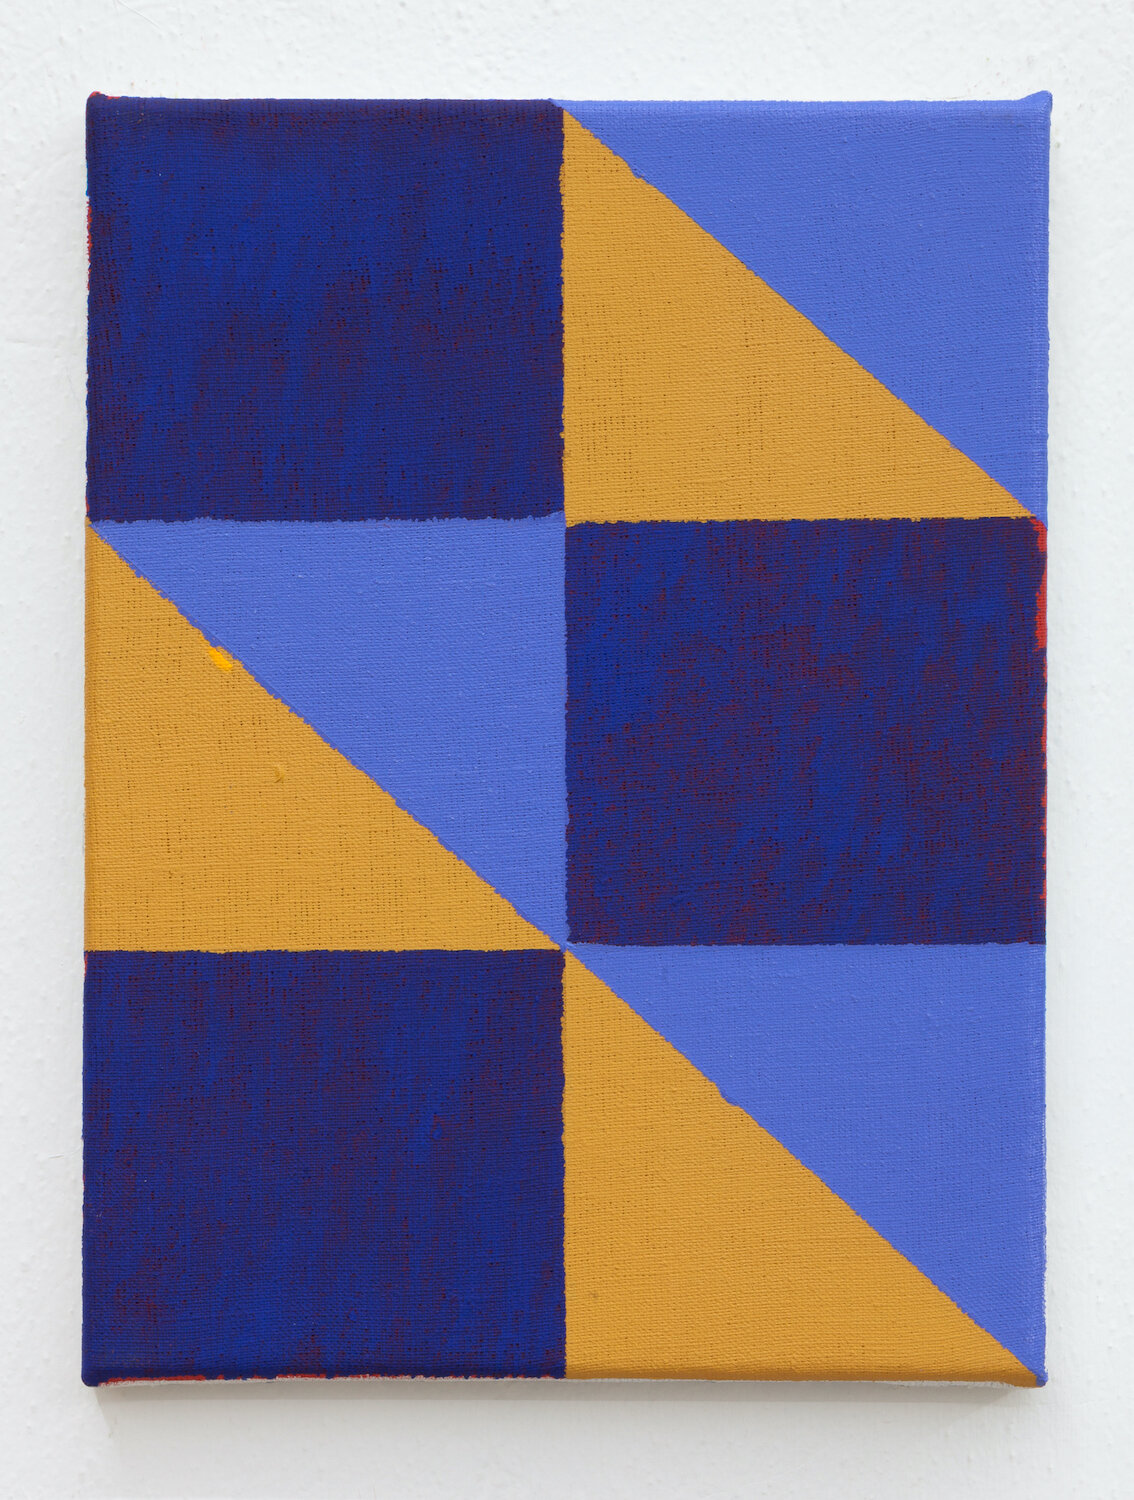  Joshua Abelow,  Untitled (Abstraction “HY”) , 2019, Oil on linen, 12 x 9 inches 